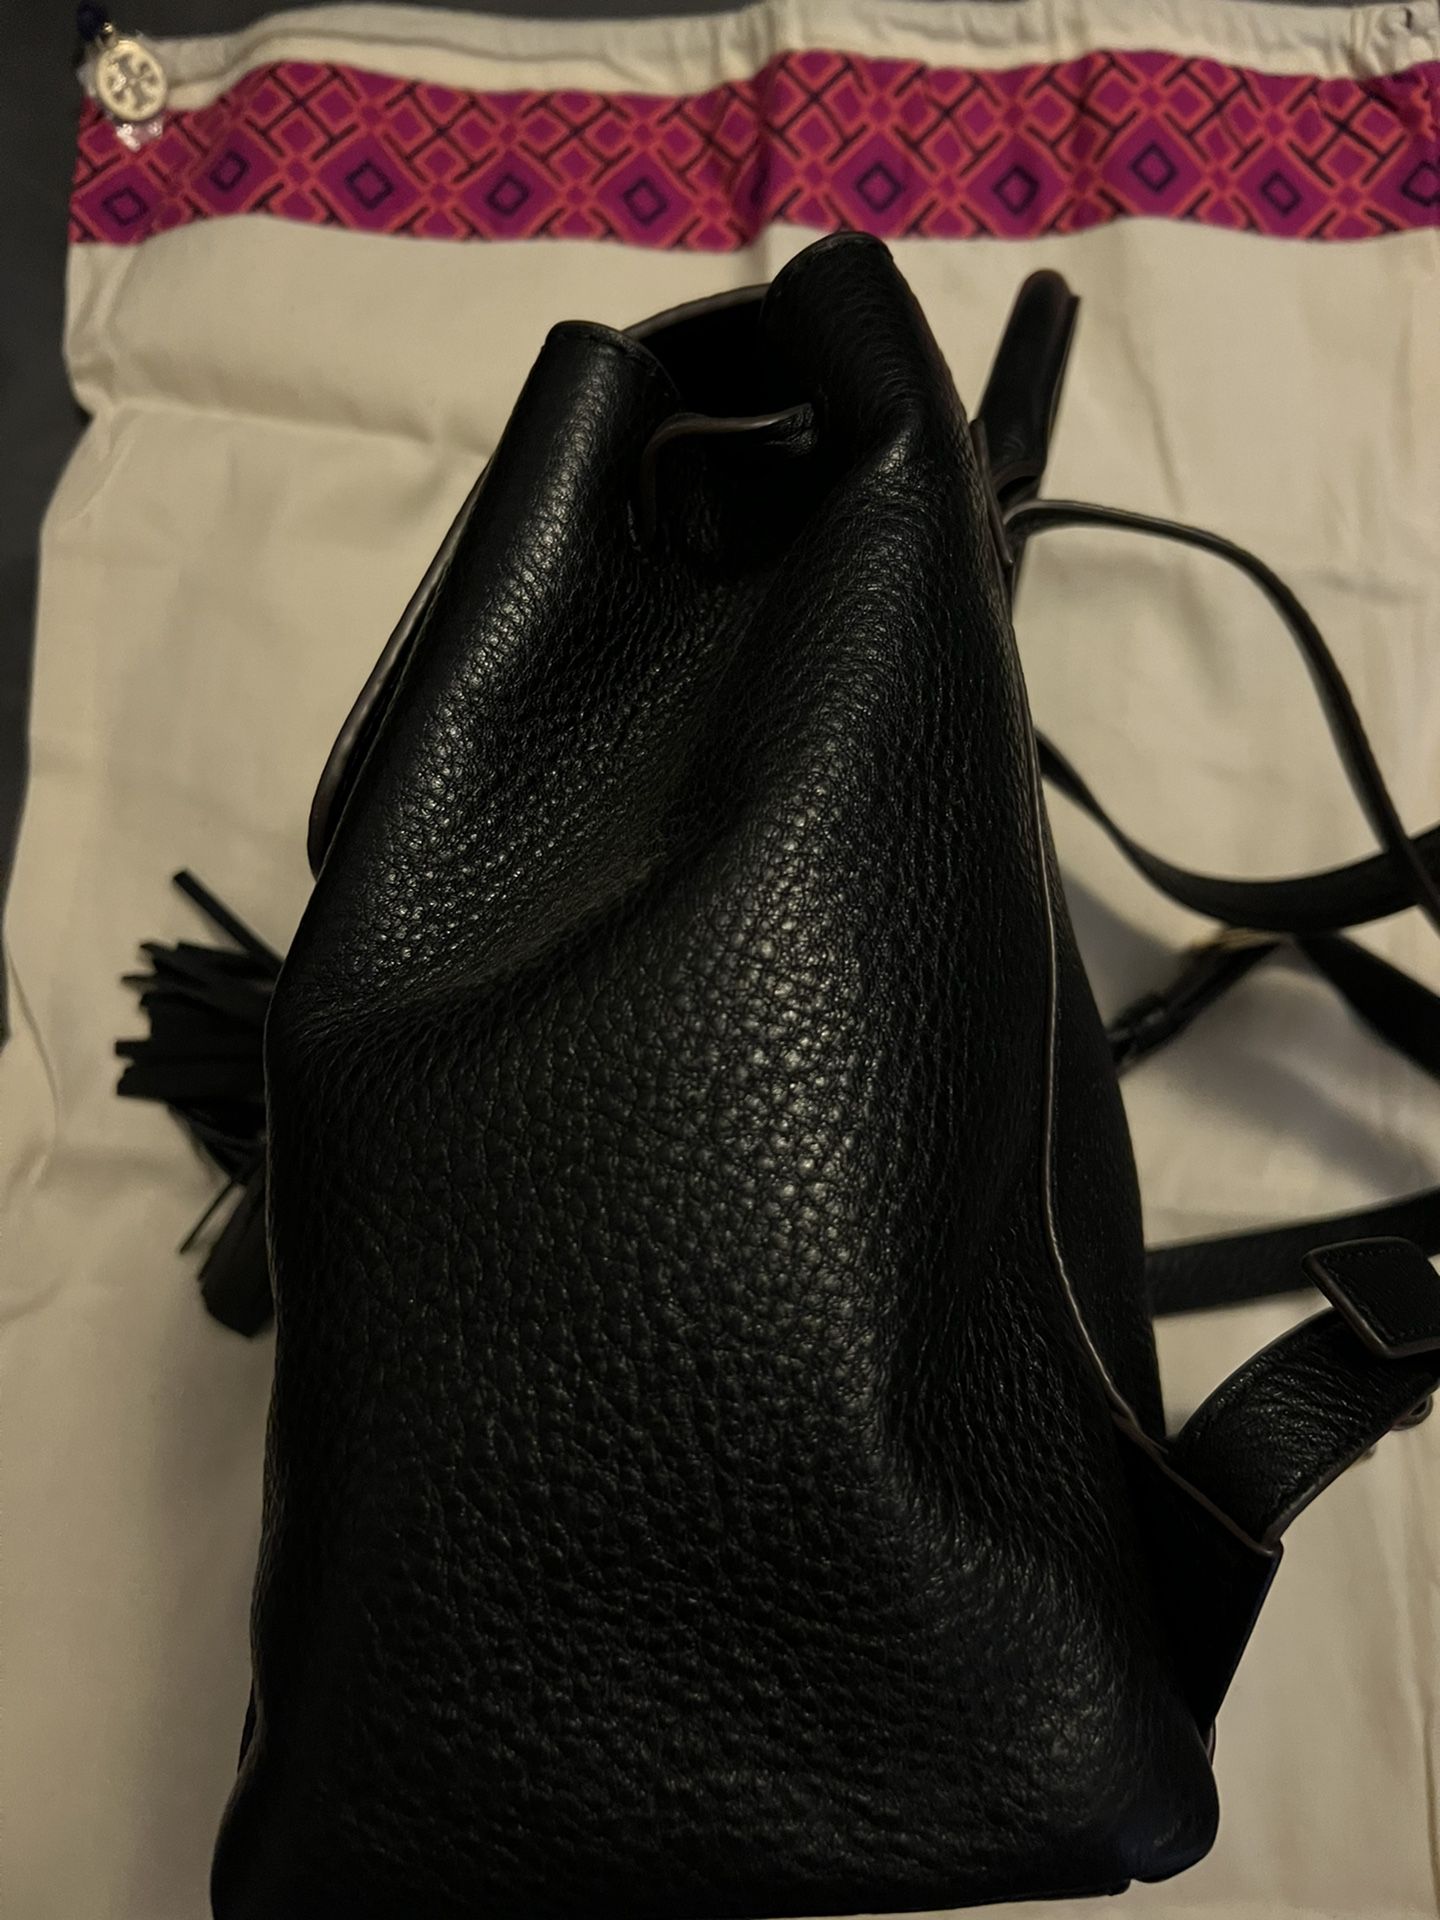 Tory Burch Thea Women's Mini Pebbled Small Tiny Black Leather Backpack for  Sale in Chula Vista, CA - OfferUp